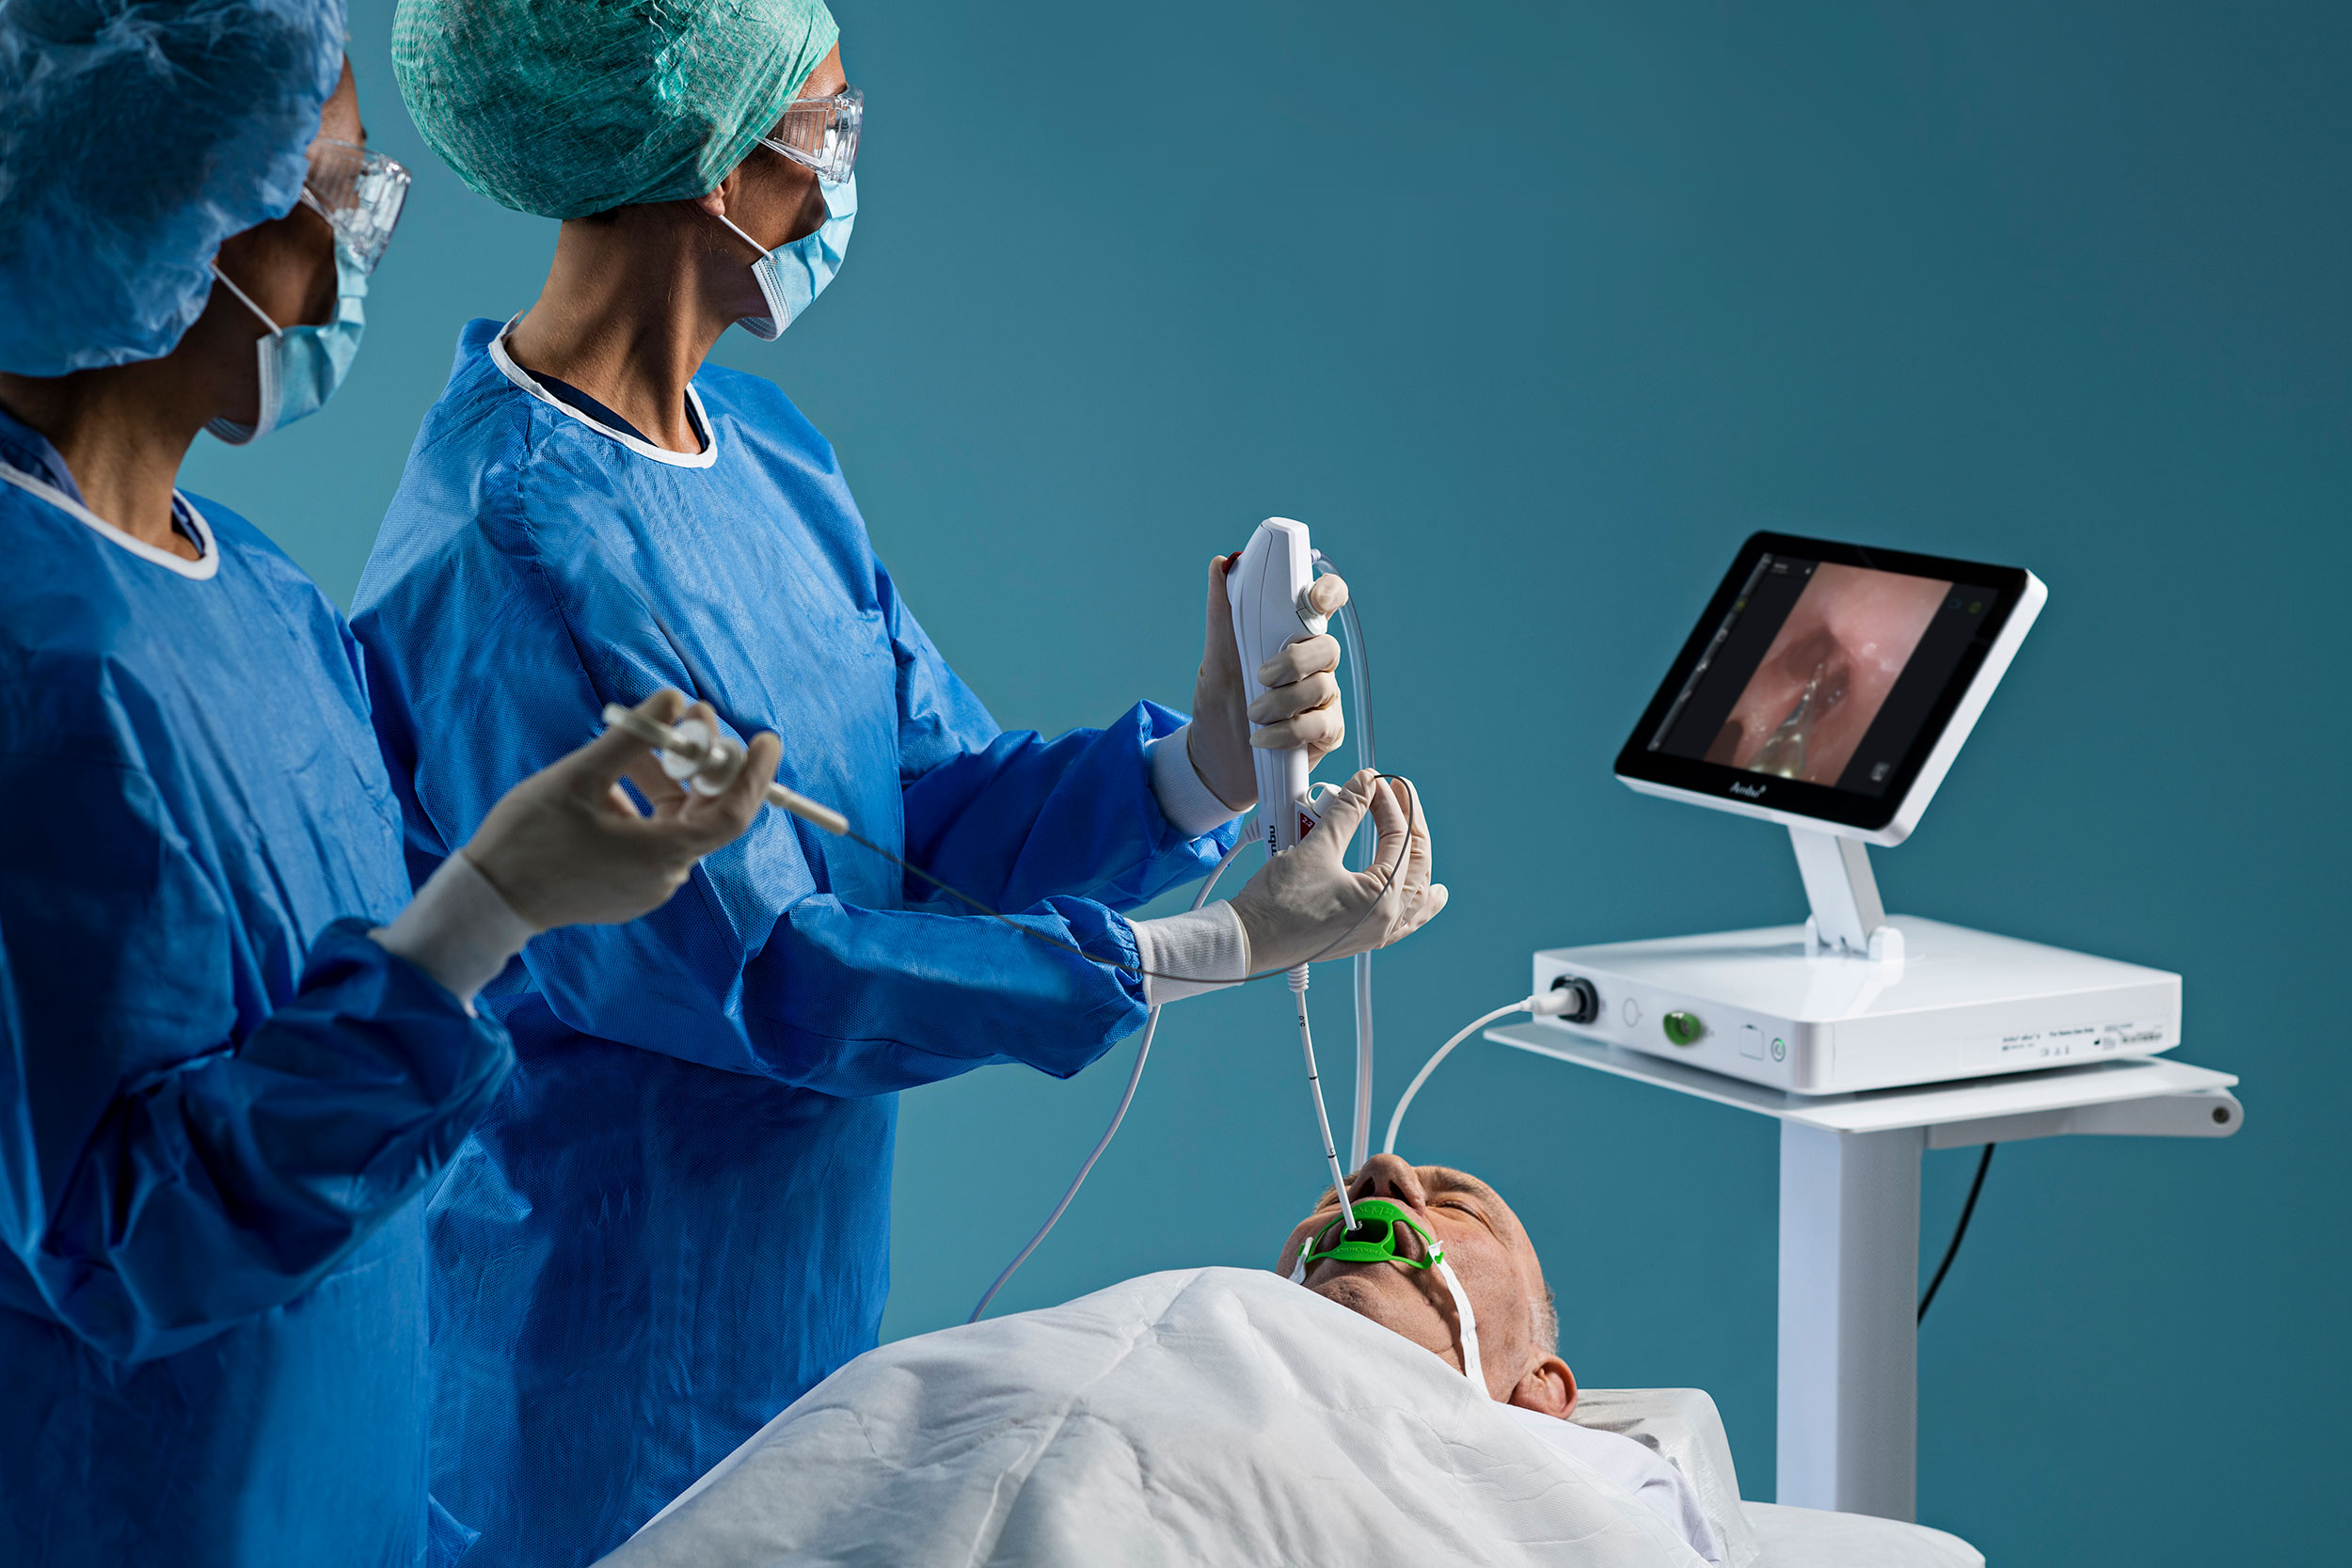 Single-use endoscopes are reaching beyond the ICU into the bronchoscopy suite.